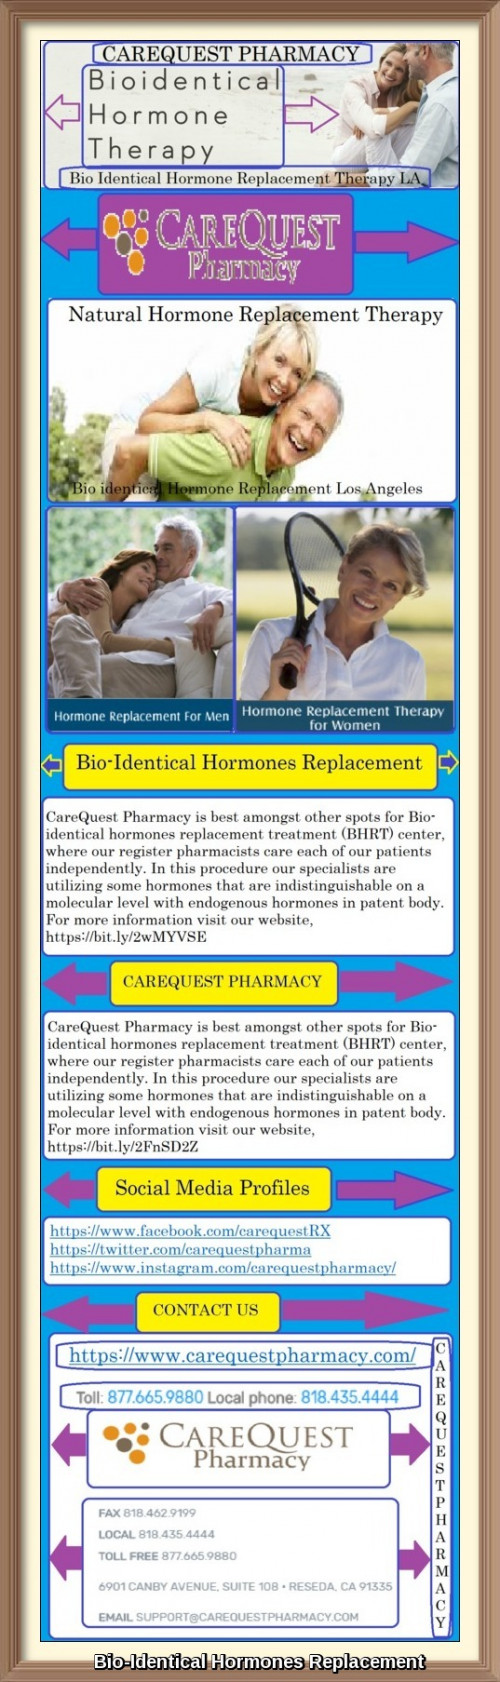 CareQuest Pharmacy is best amongst other spots for Bio- identical hormones replacement treatment (BHRT) center, where our register pharmacists care each of our patients independently. In this procedure our specialists are utilizing some hormones that are indistinguishable on a molecular level with endogenous hormones in patent body. For more information visit our website,https://bit.ly/2wMYVSE